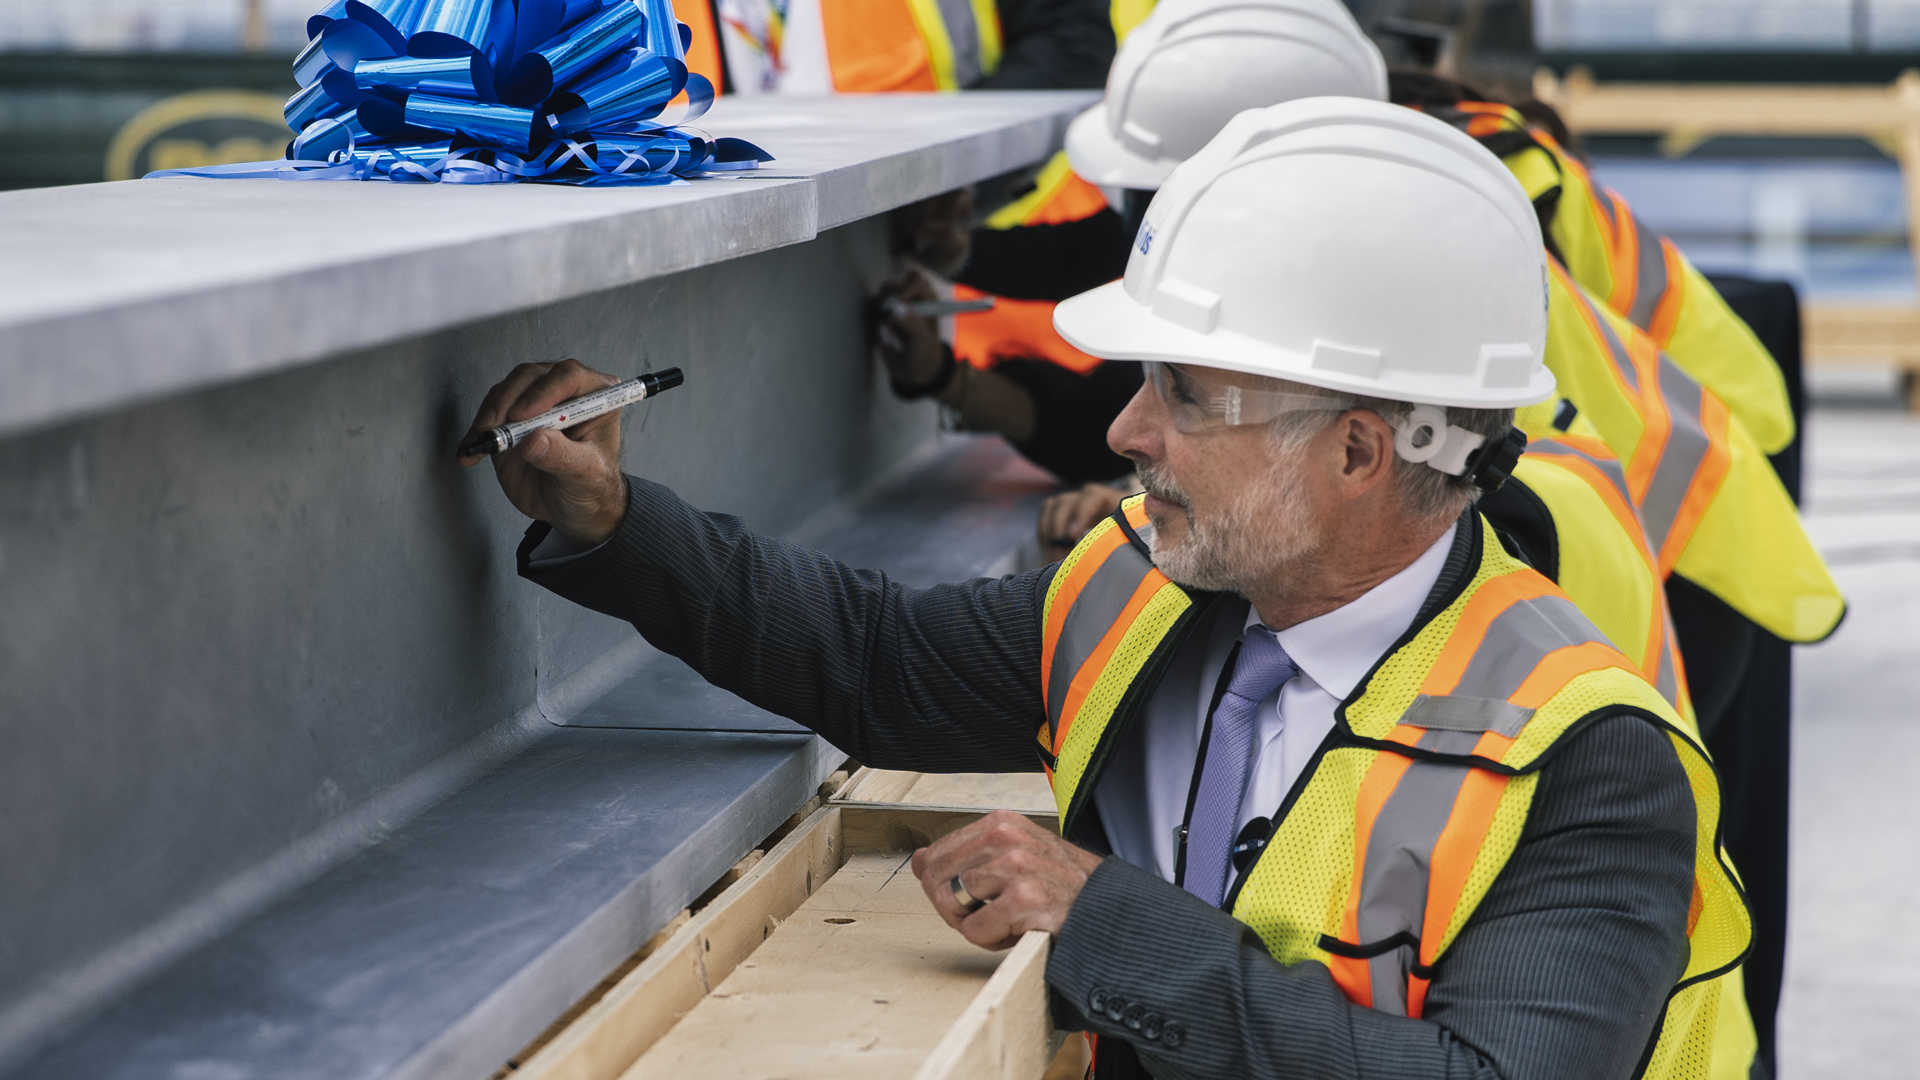 A man wearing a hard hat, glasses and a construction vest kneels down to sign a large steel beam using a permanent marker